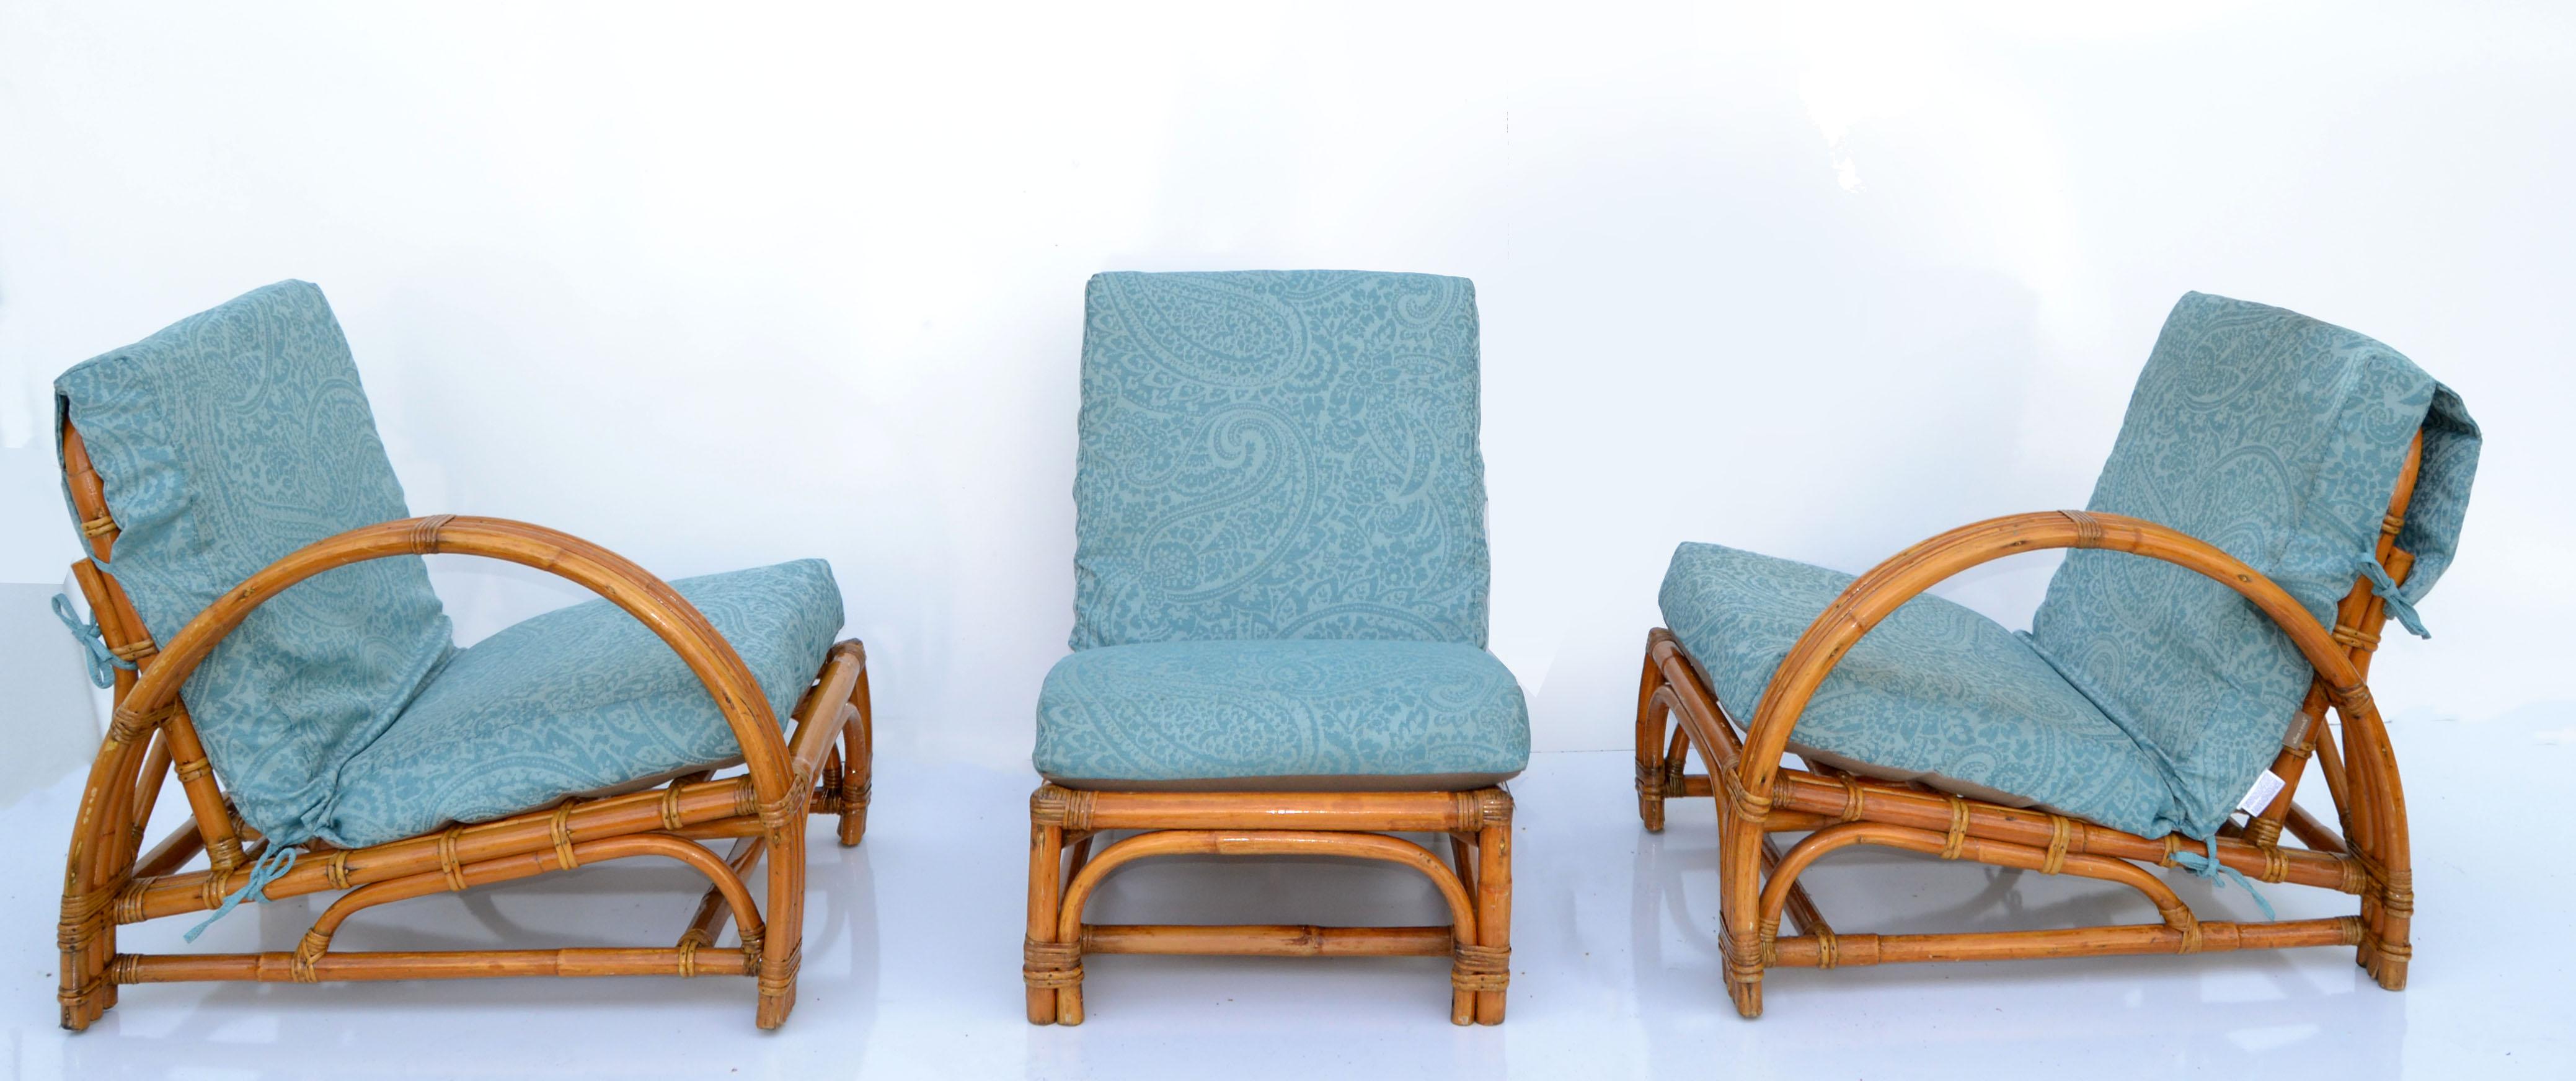 20th Century Calif Asia 4 Piece Seating Set Bamboo Sofa & Lounge Chair Turquoise Upholstery